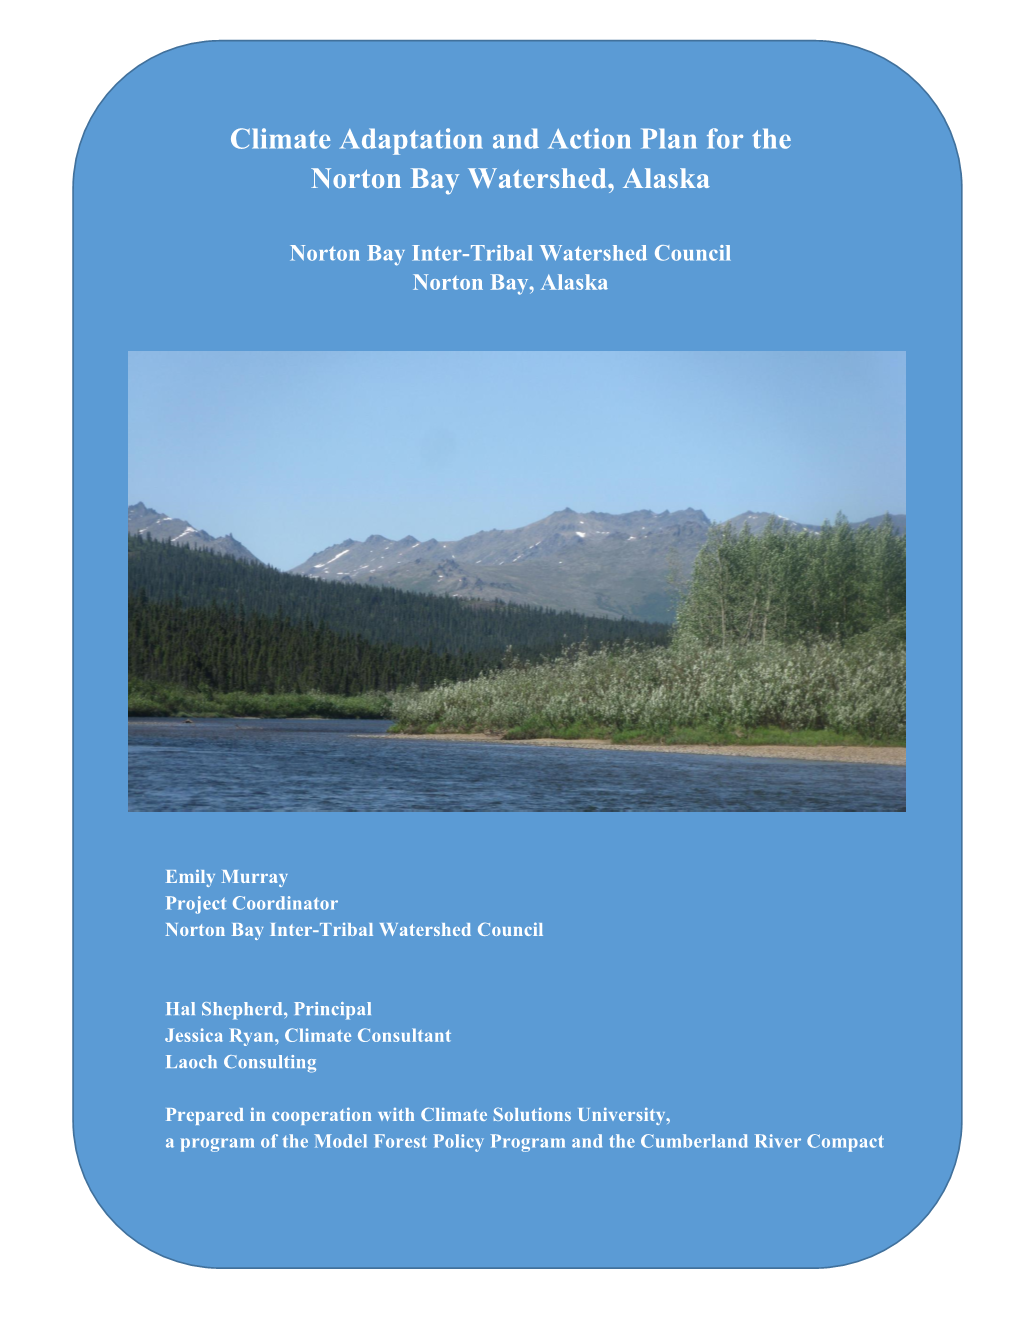 Climate Adaptation and Action Plan for the Norton Bay Watershed, Alaska